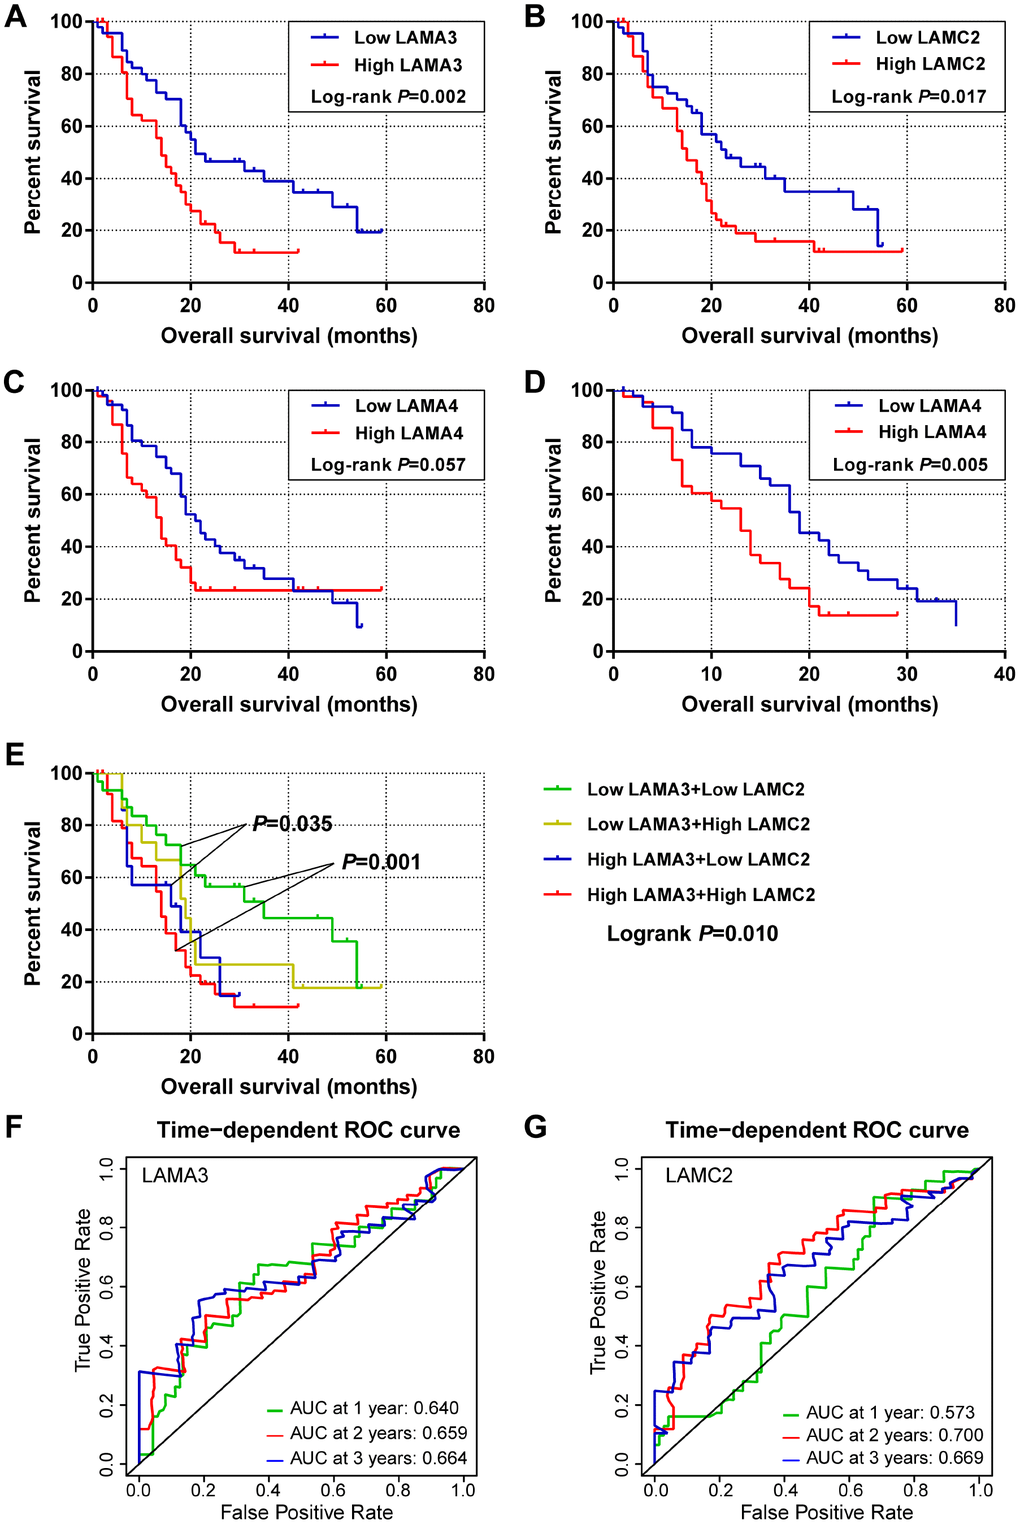 Survival and survivalROC analysis of LAMA3 and LAMC2 expression in the GSE21501 PDAC cohort. (A–C) Kaplan–Meier survival curves for OS of the LAMA3, LAMC2 and LAMA4 gene expression groups. (D) Kaplan–Meier survival curves for 3-year OS for LAMA4 expression groups. (E) Kaplan–Meier survival curves for OS of the combined LAMA3 and LAMC2 gene expression groups. (F–G) Time-dependent ROC curve for LAMA3 and LAMC2 expression in PDAC patients.